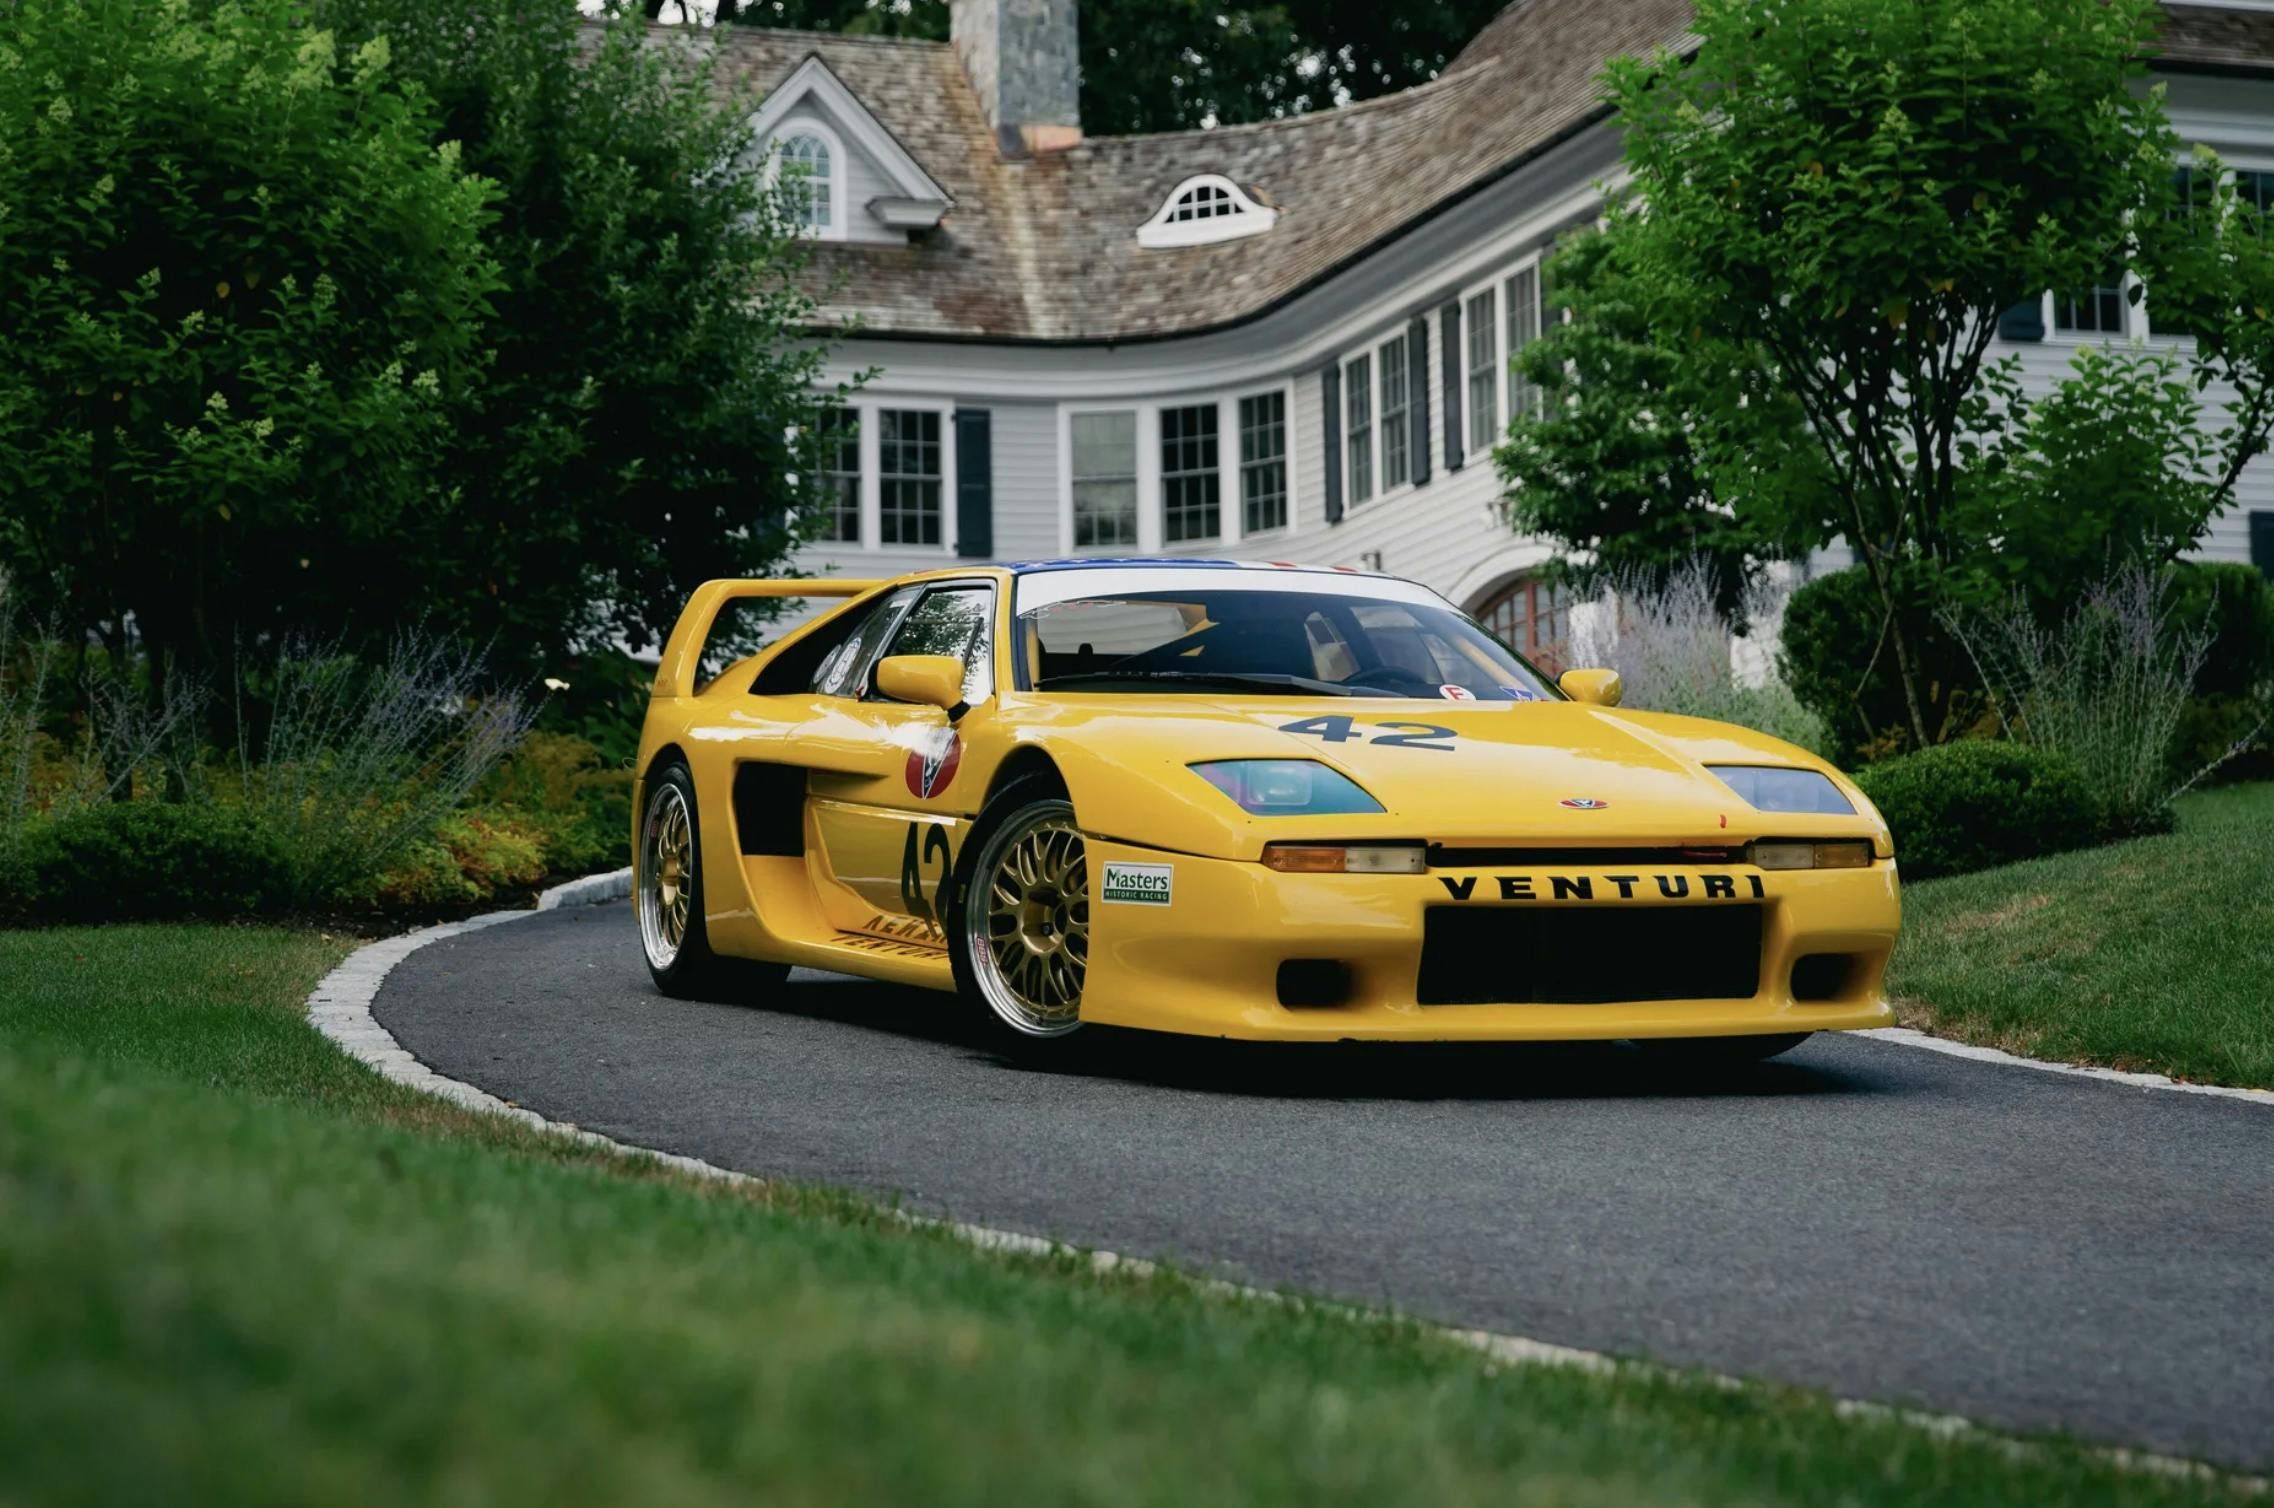 Driving the Venturi 400 Trophy, France's rare and violent '90s exotic